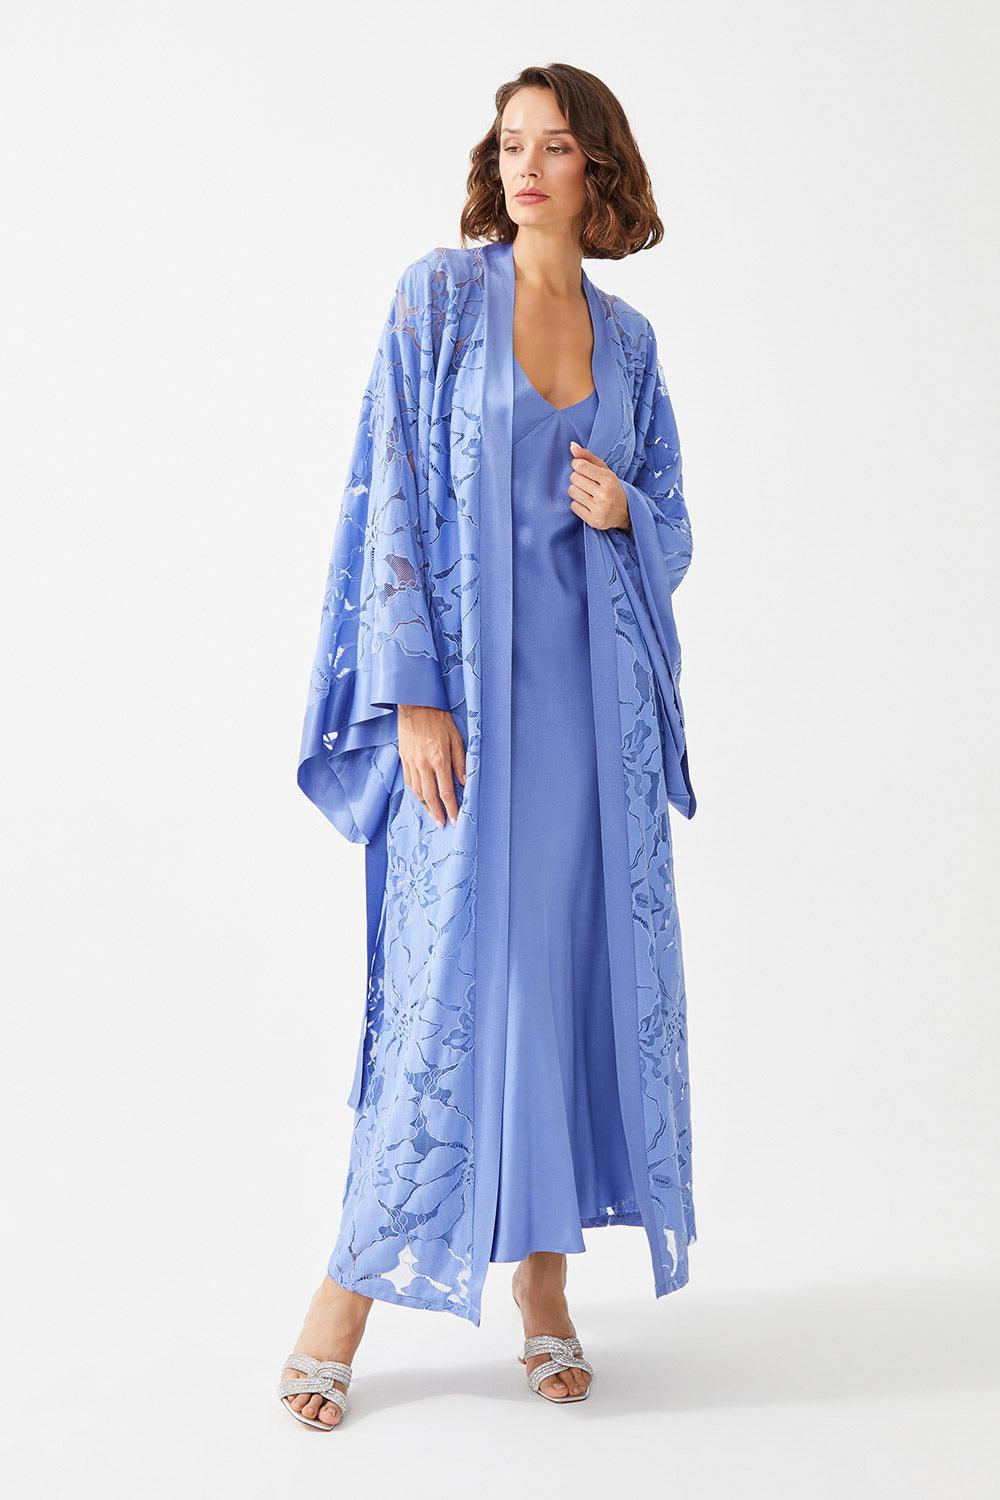 Honesty Long Rayon Full Trimmed with Lace Robe Set -Lilac - Bocan